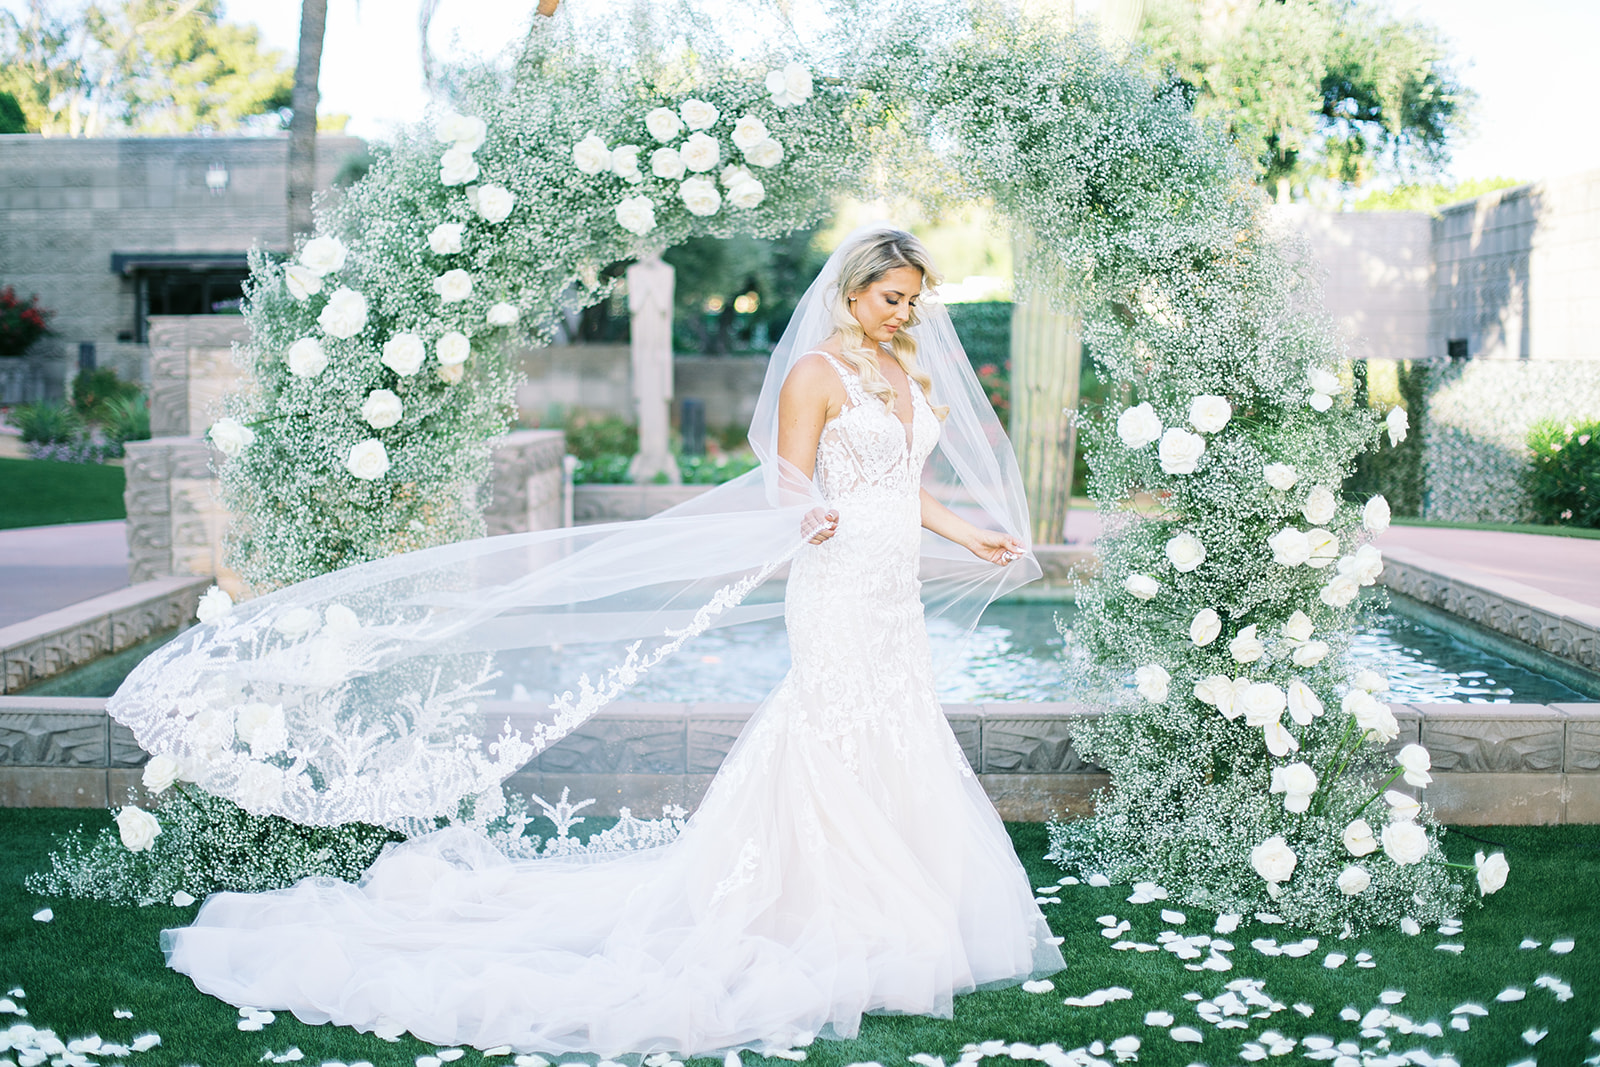 Bride in wedding dress standing in front of baby's breath arch at wedding ceremony.